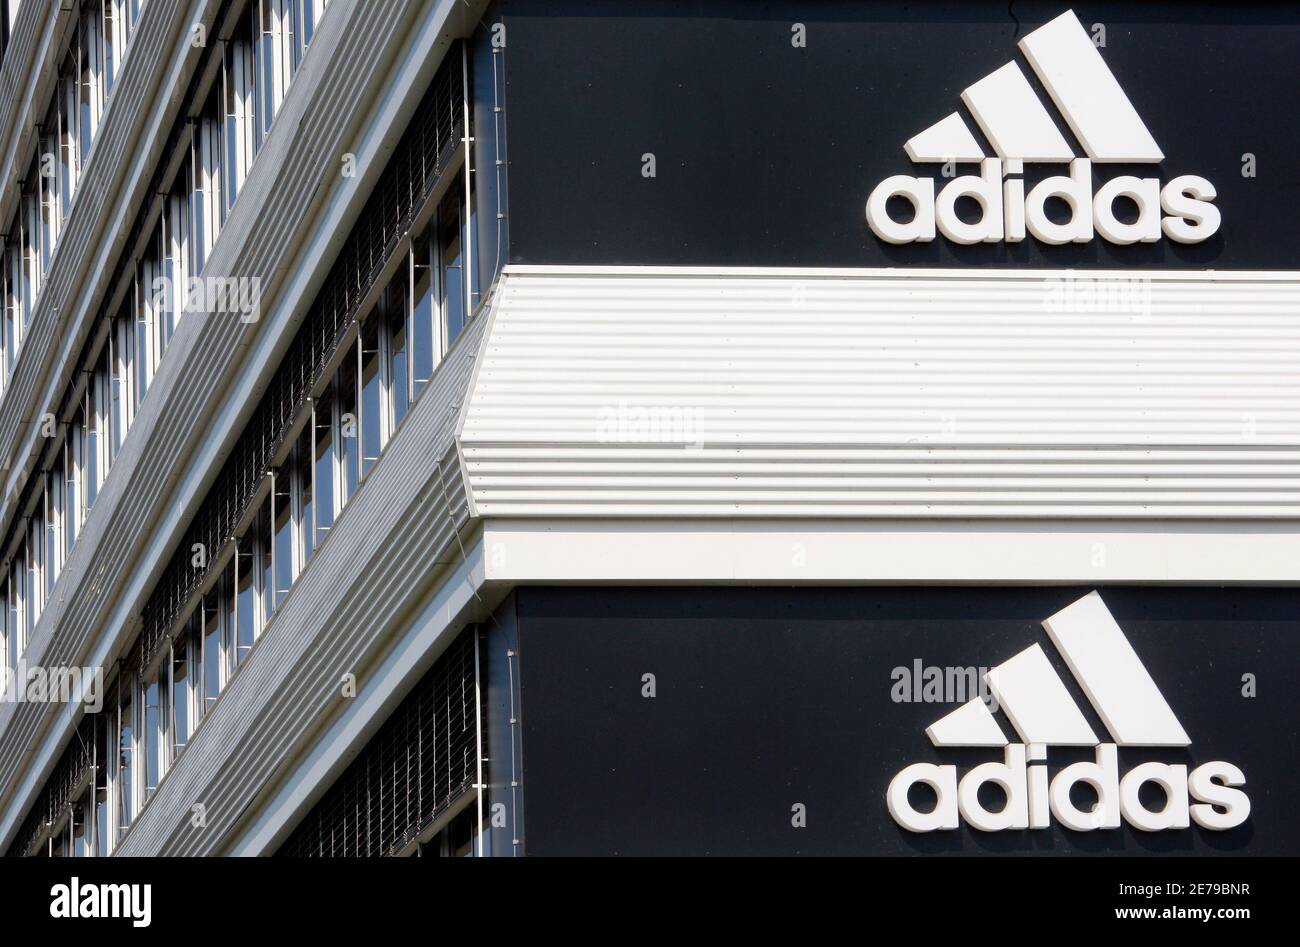 Adidias logos are seen on the company's building in Landersheim near  Strasbourg March 31, 2009. The Paris prosecutor plans to open an  investigation targeting Michelin, Total and Adidas over suspected tax fraud,